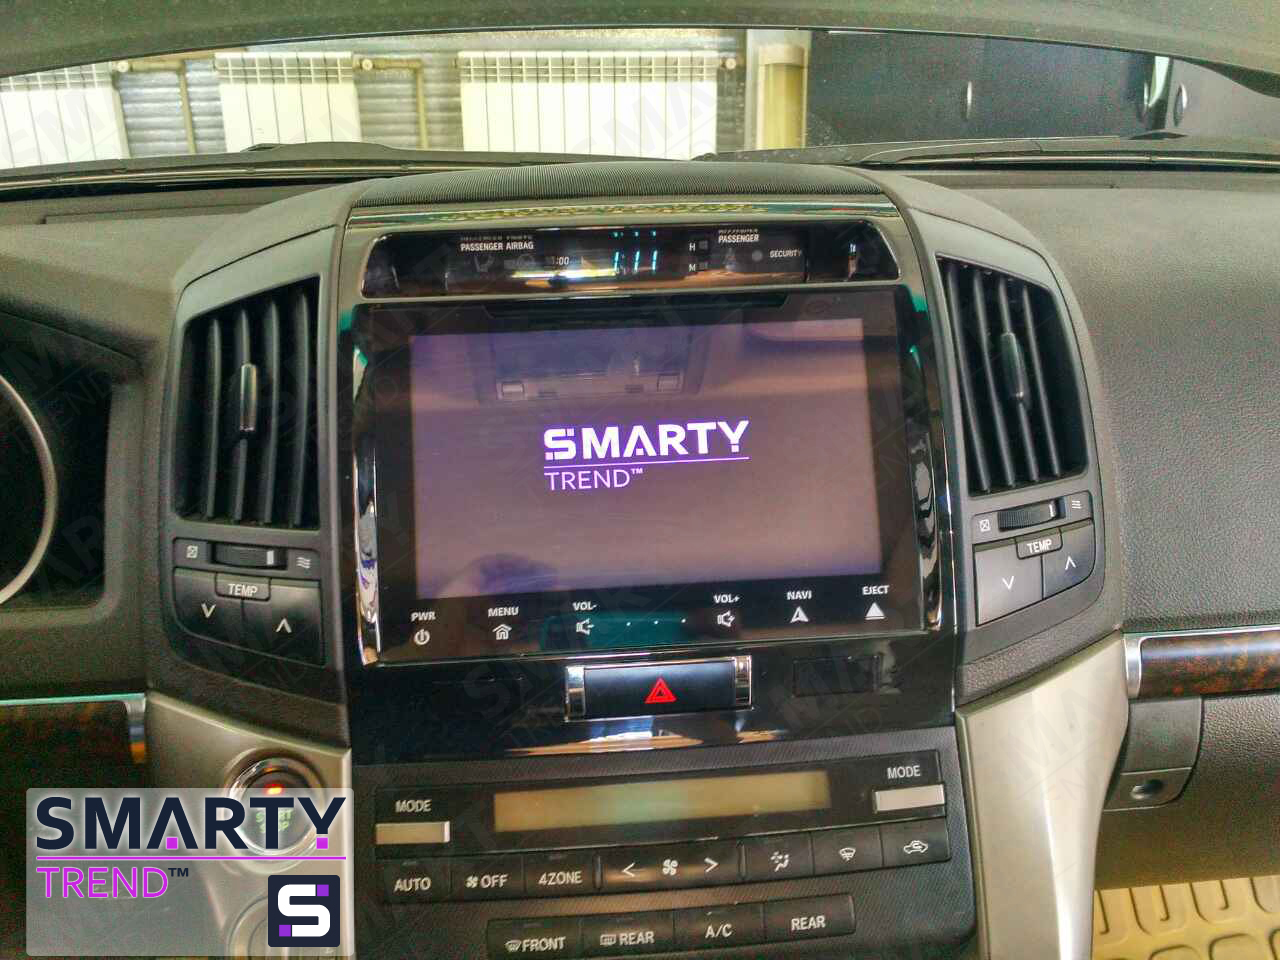 SMARTY Trend for Toyota Land Cruiser 200 (2008-2015).